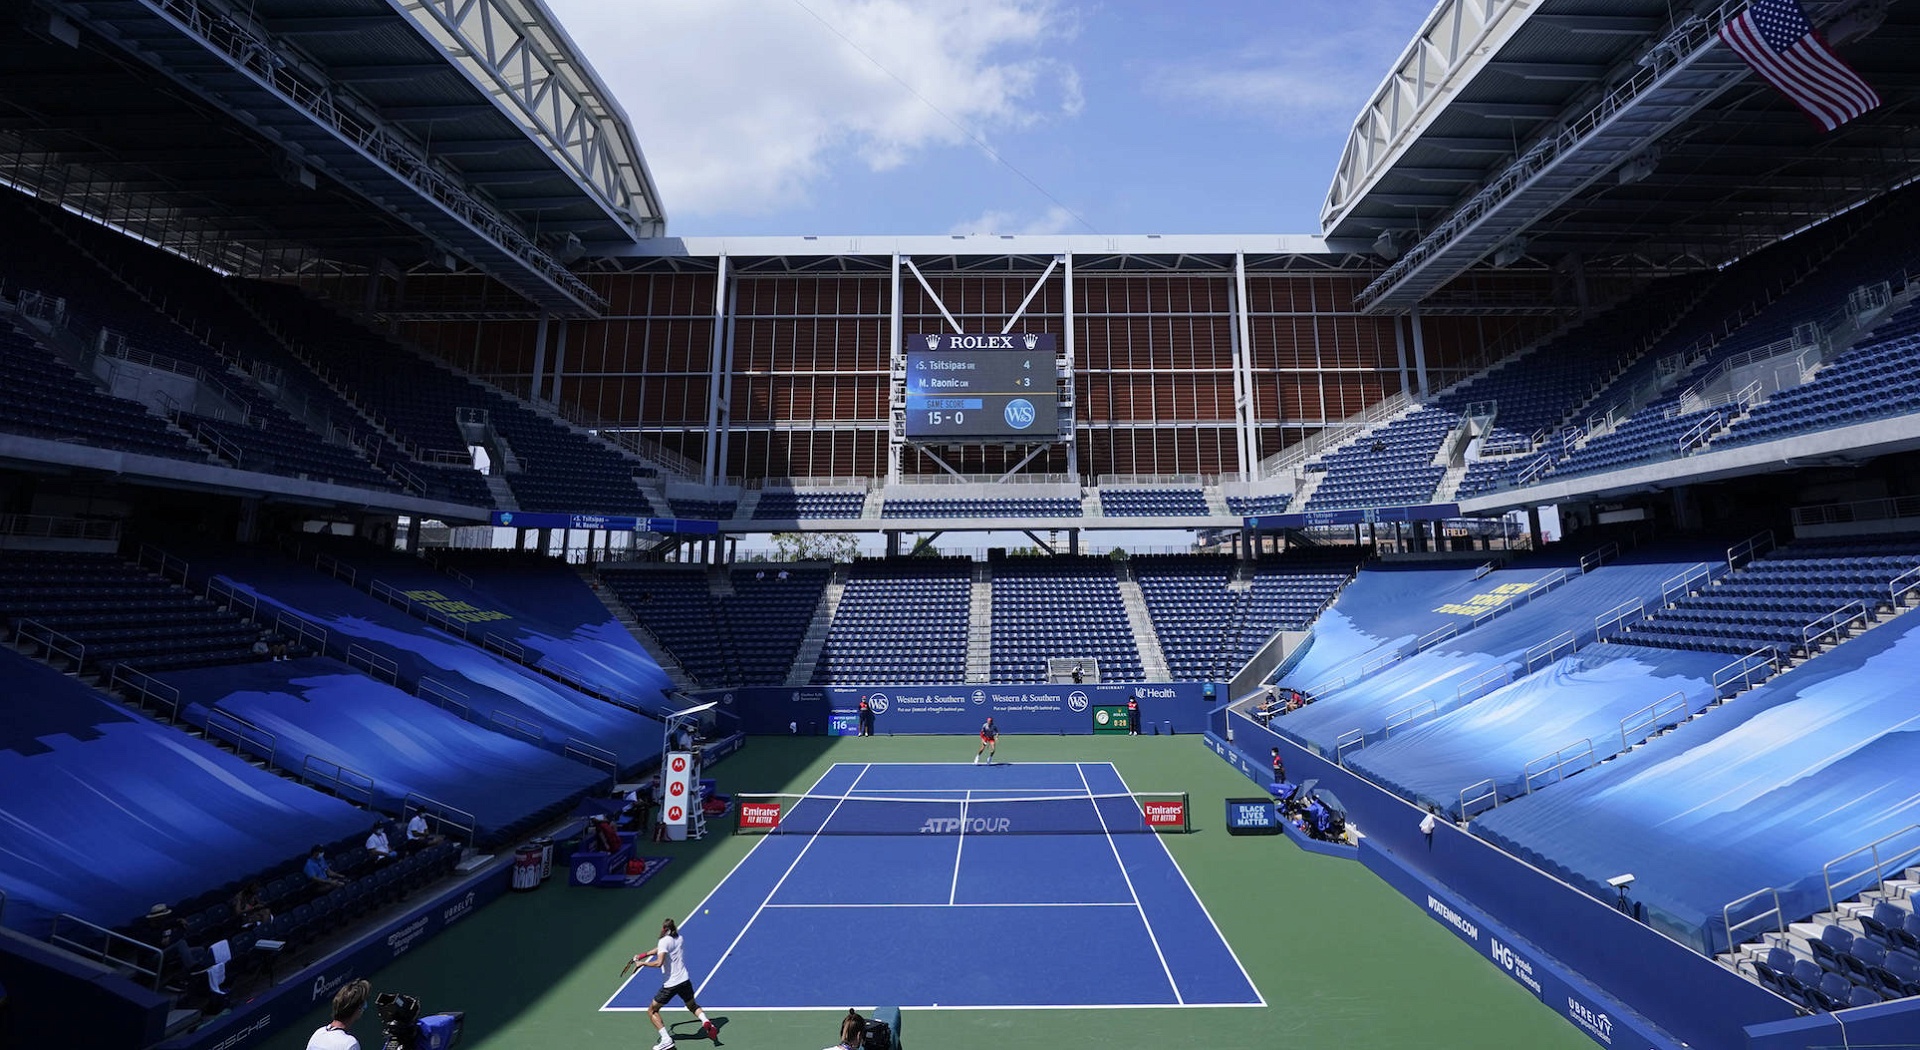 The empty Louis-Armstrong court in Flushing Meadows, New York, during Tsitsipas-Raonic for Western and Southern Open, August 2020